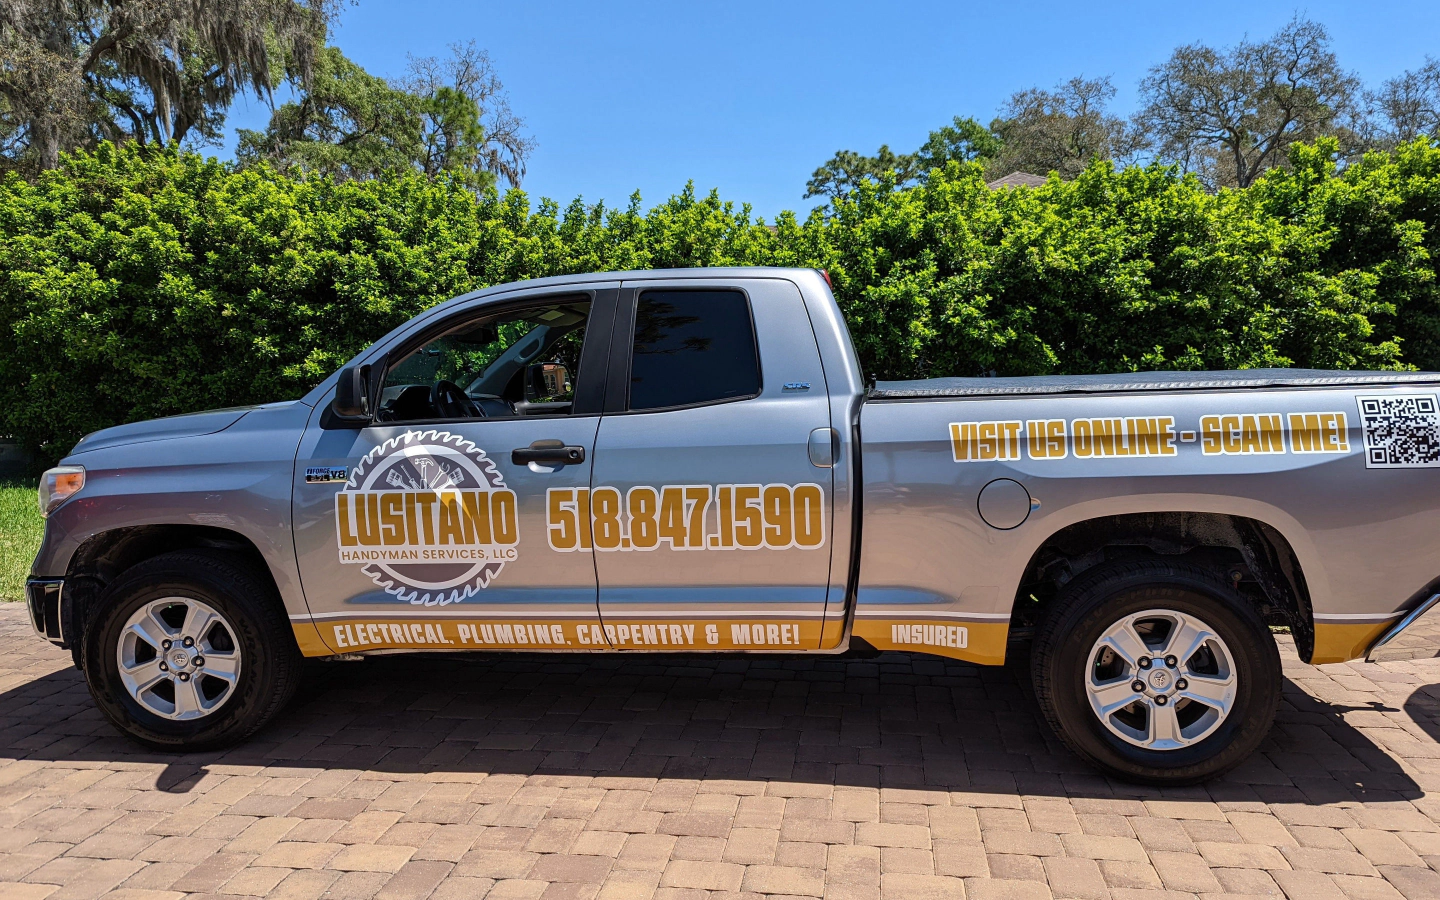 Image of a wrapped Toyota Tundra from Lusitano Handyman Services